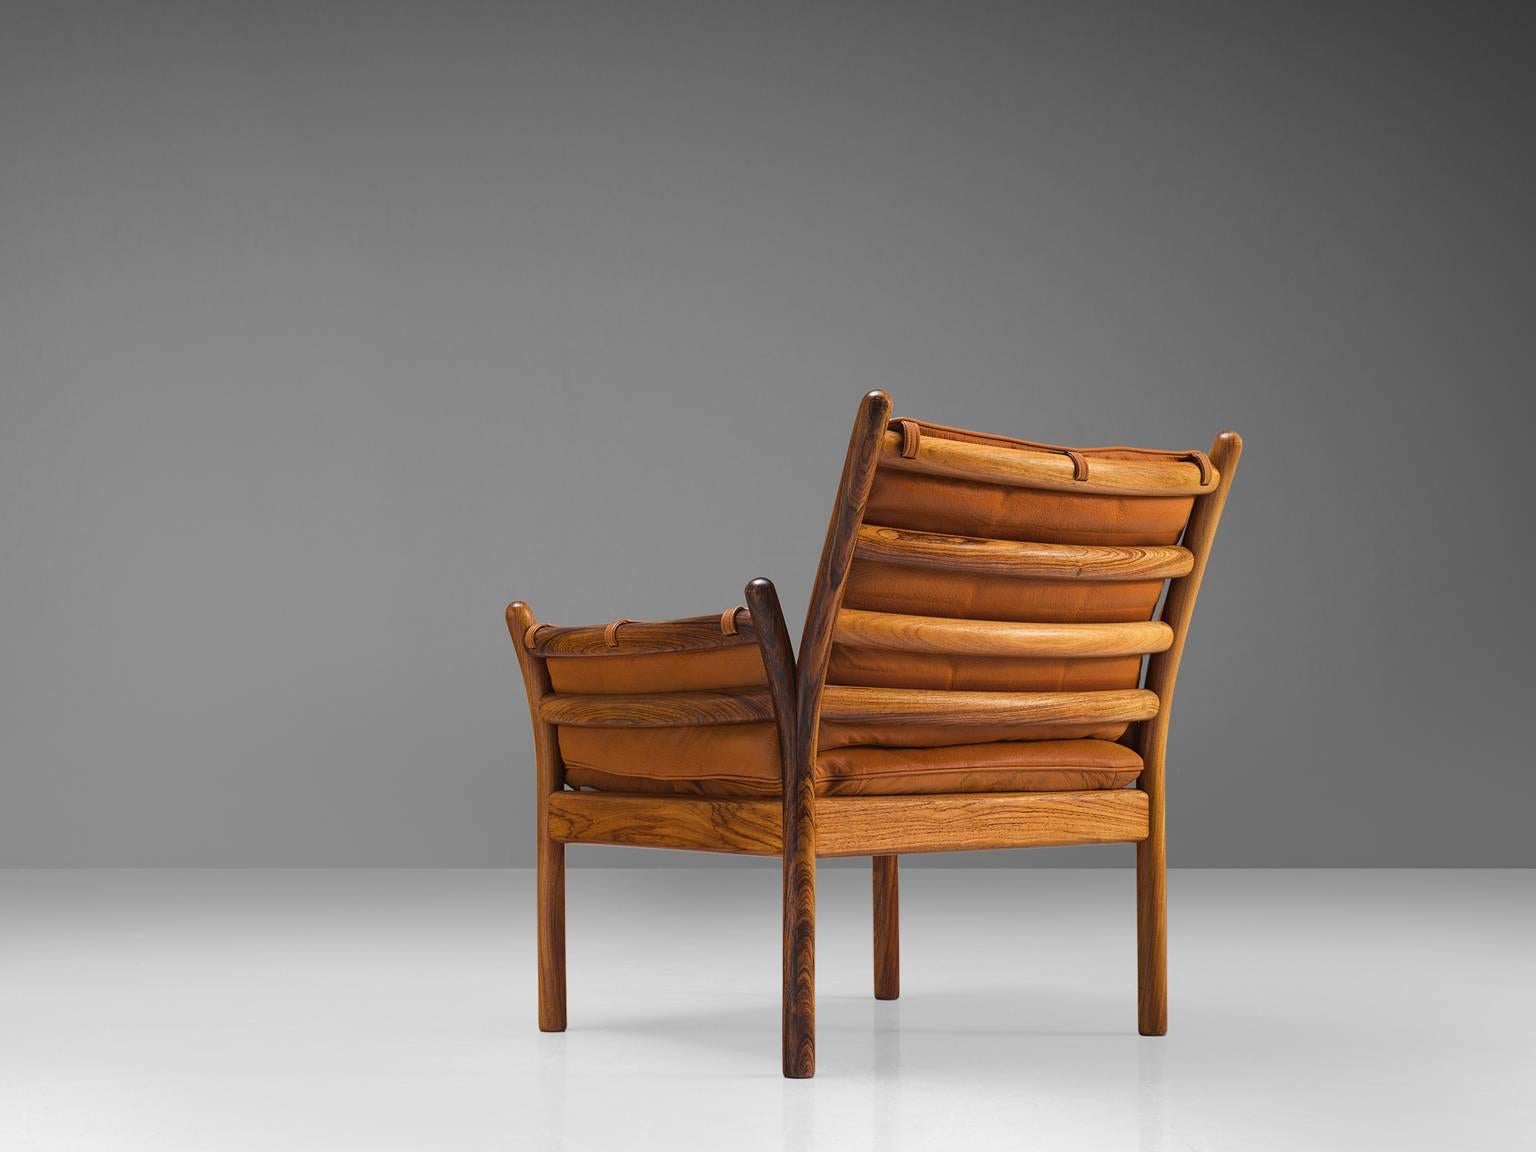 Illum Wikkelsø by CFC Silkeborg, 'Genius' chair, leather and rosewood, Denmark, 1950s.

This chair is made out of solid rosewood and features a cognac leather cushion on both seat and back.. The chair is created as a sort of slatted rosewood basket.